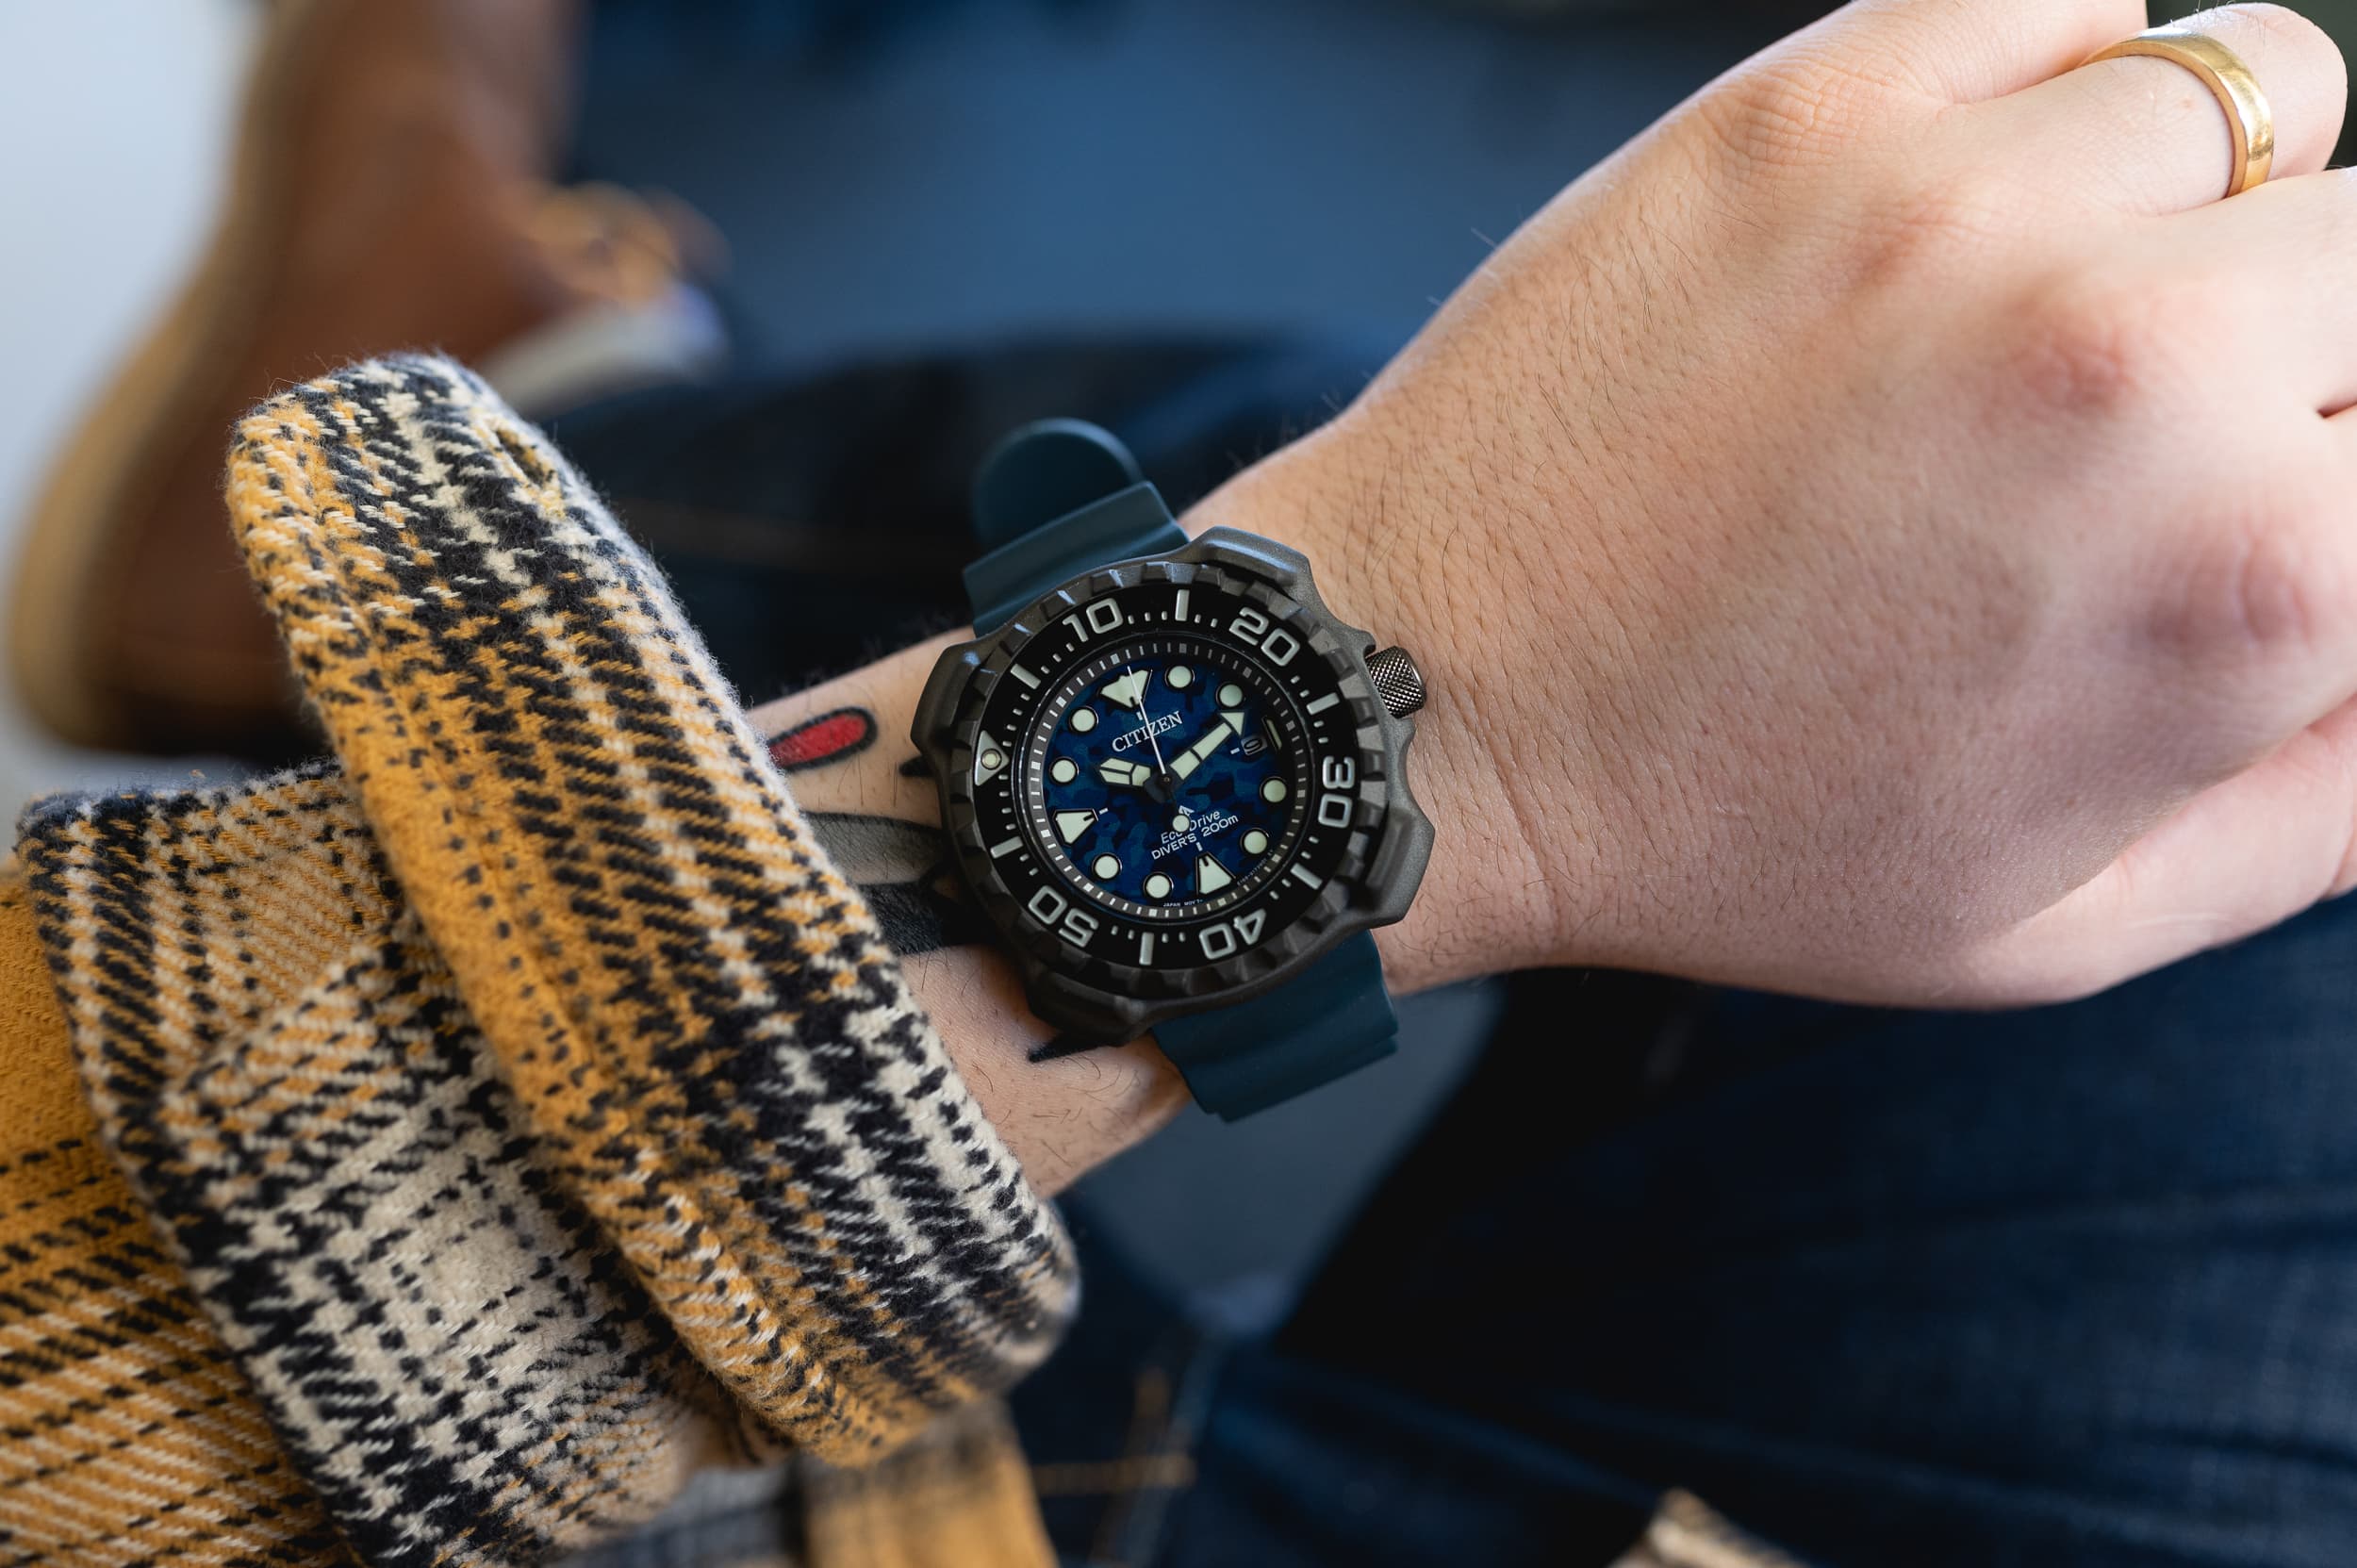 Approachable Assertive Worn Citizen Yet Review: Diver Wound The BN0227-09L & Promaster -